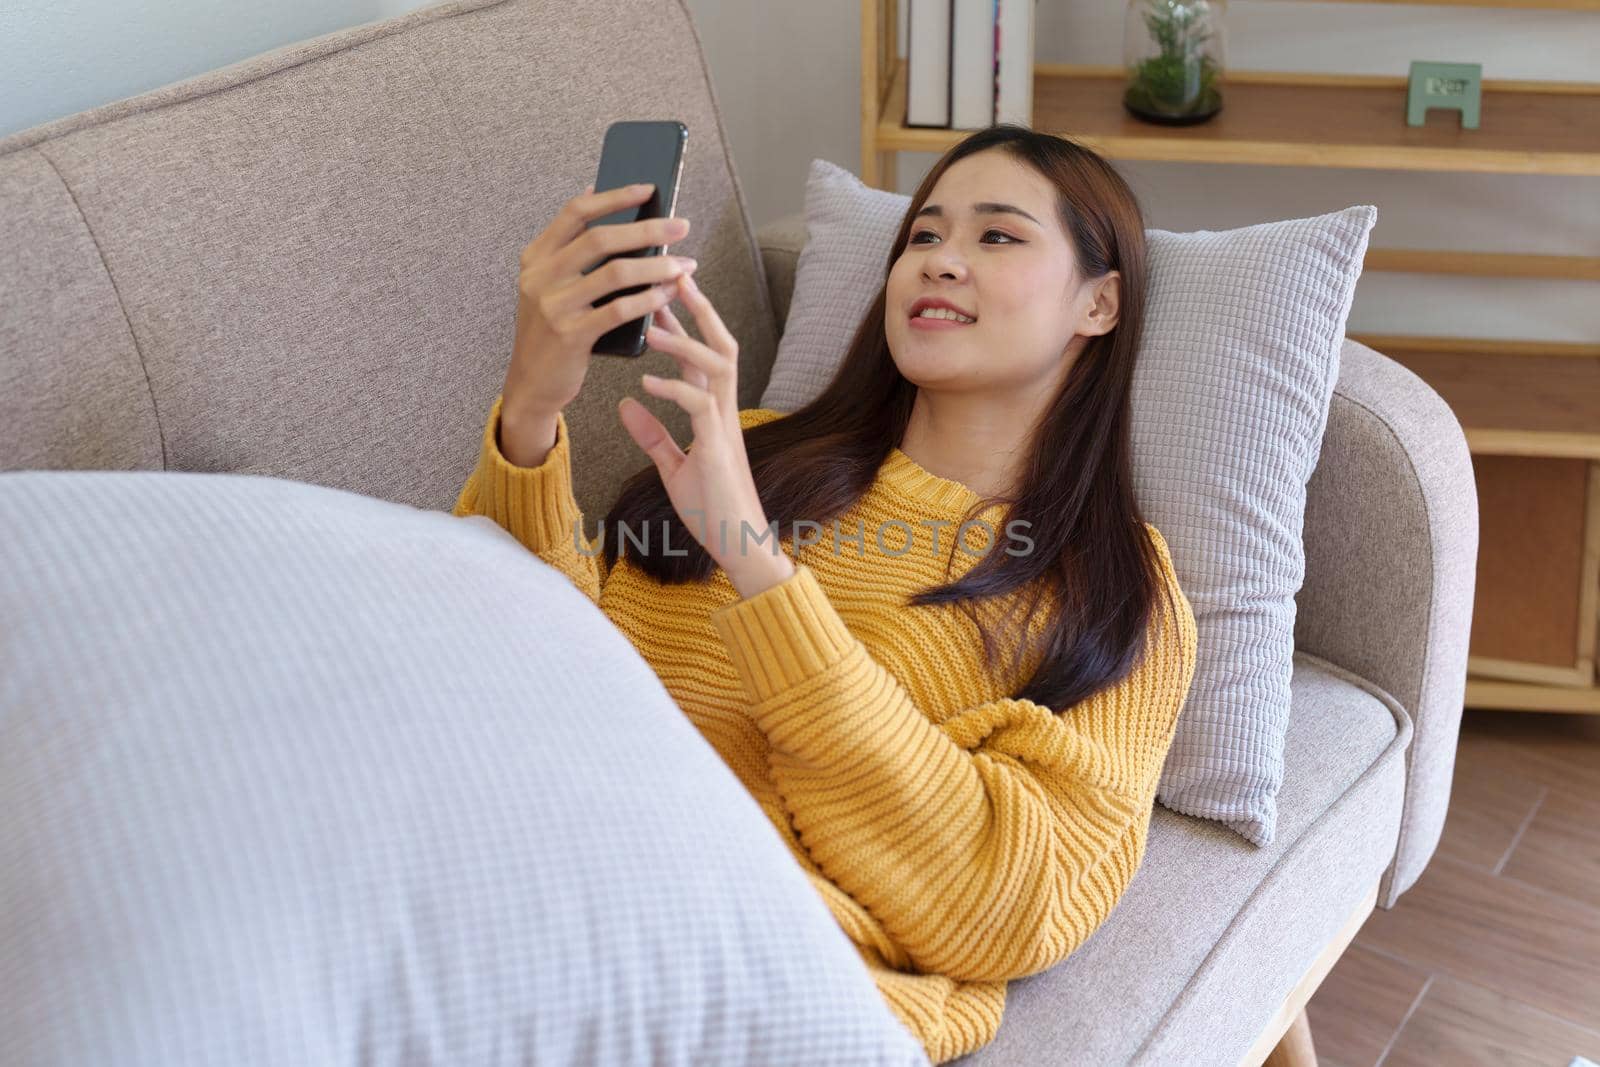 woman sleeping on sofa at home ready to use mobile phone.